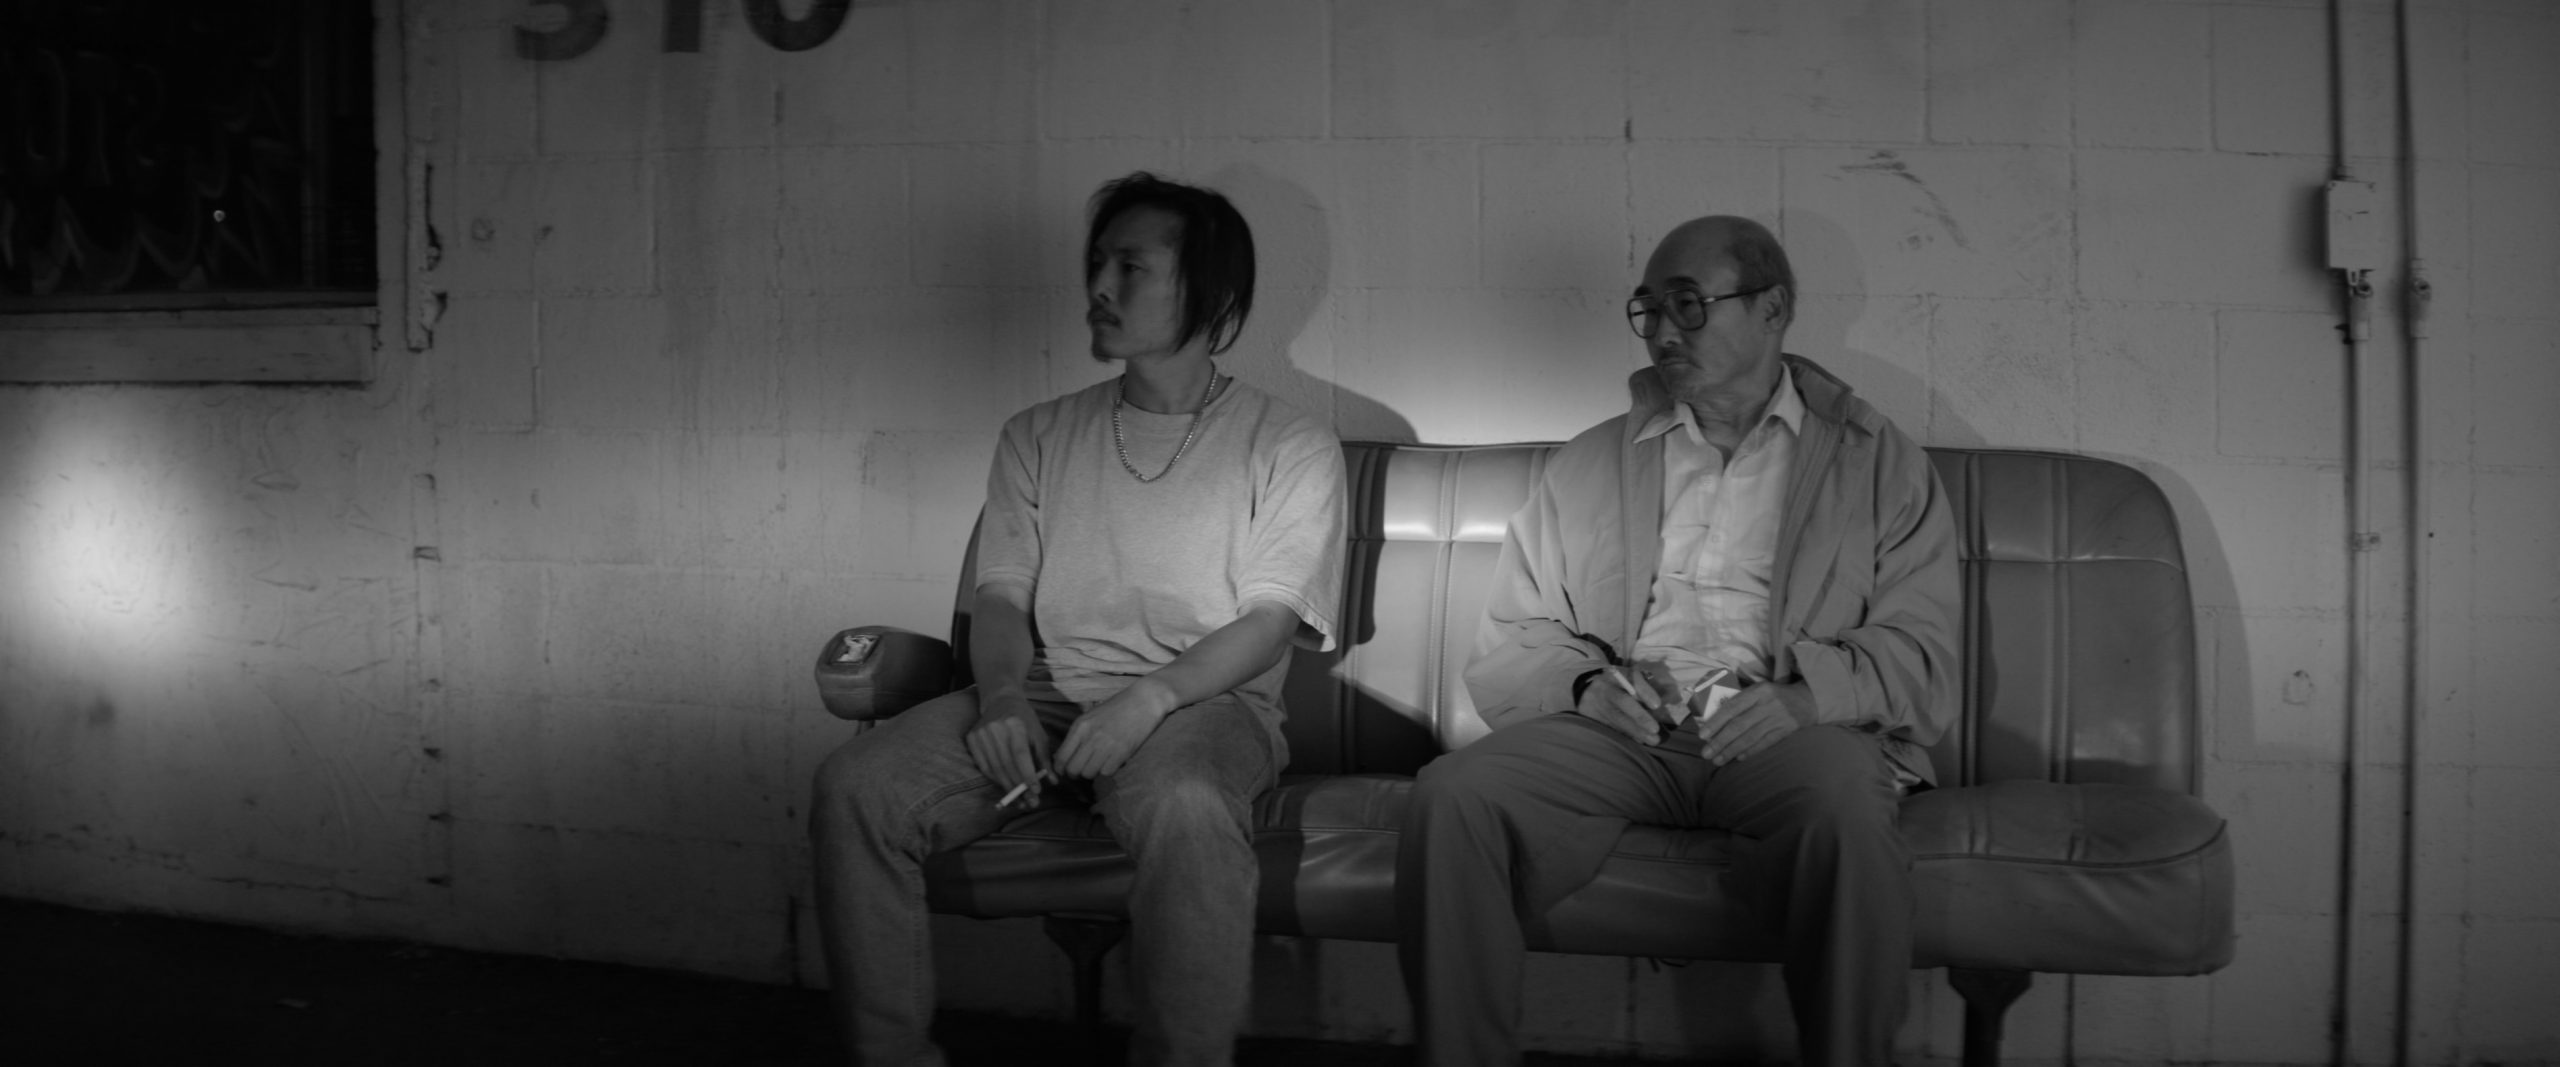 Still image from the movie Gook, with two men sitting on a couch. 